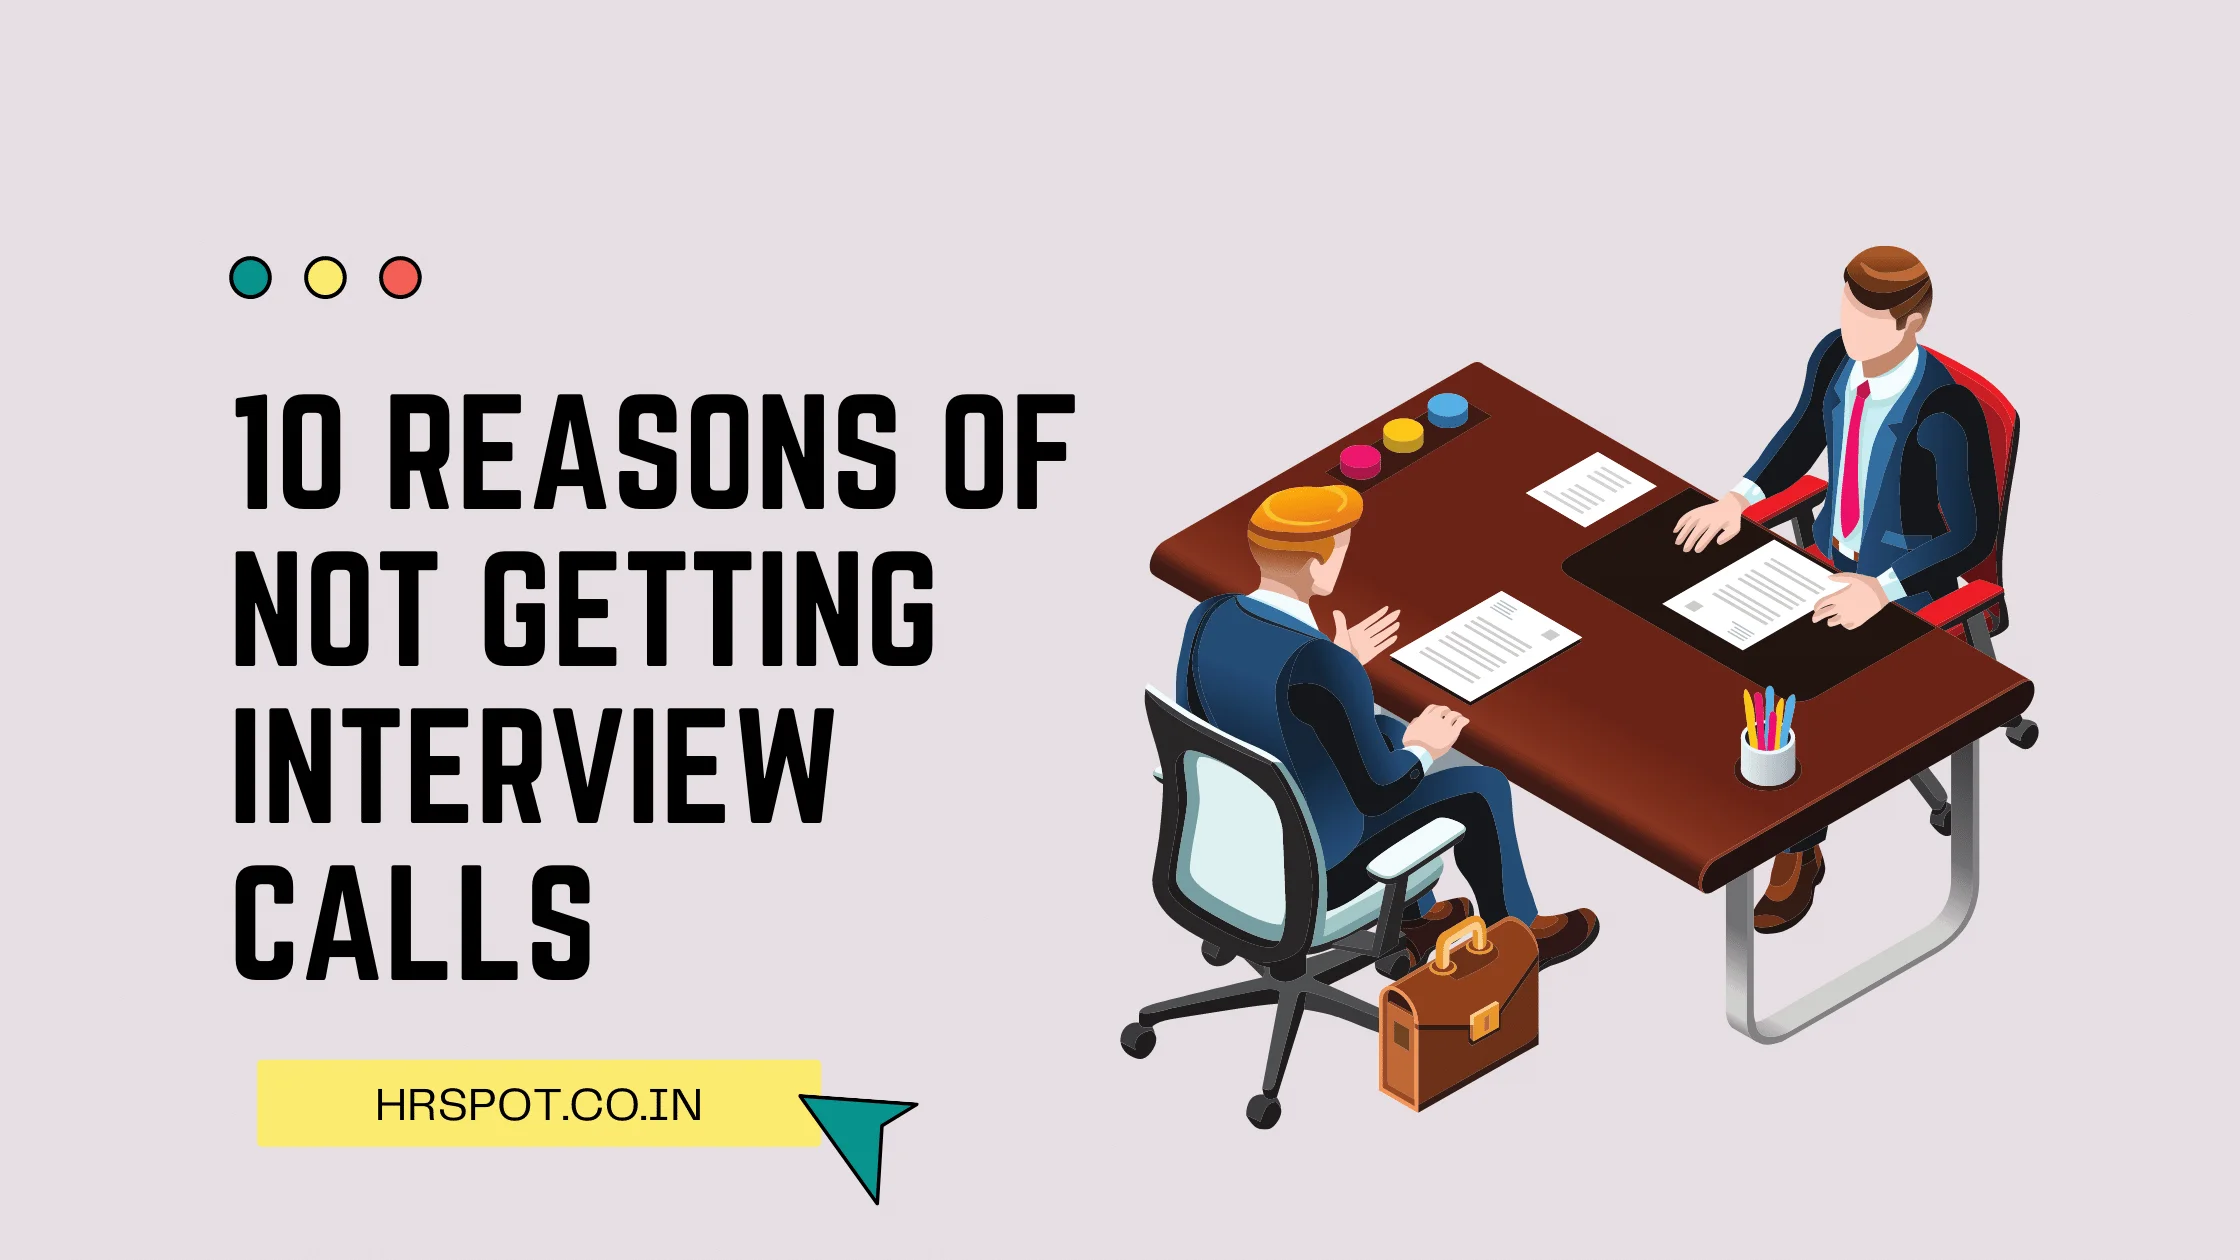 10 Reasons of not getting interview calls